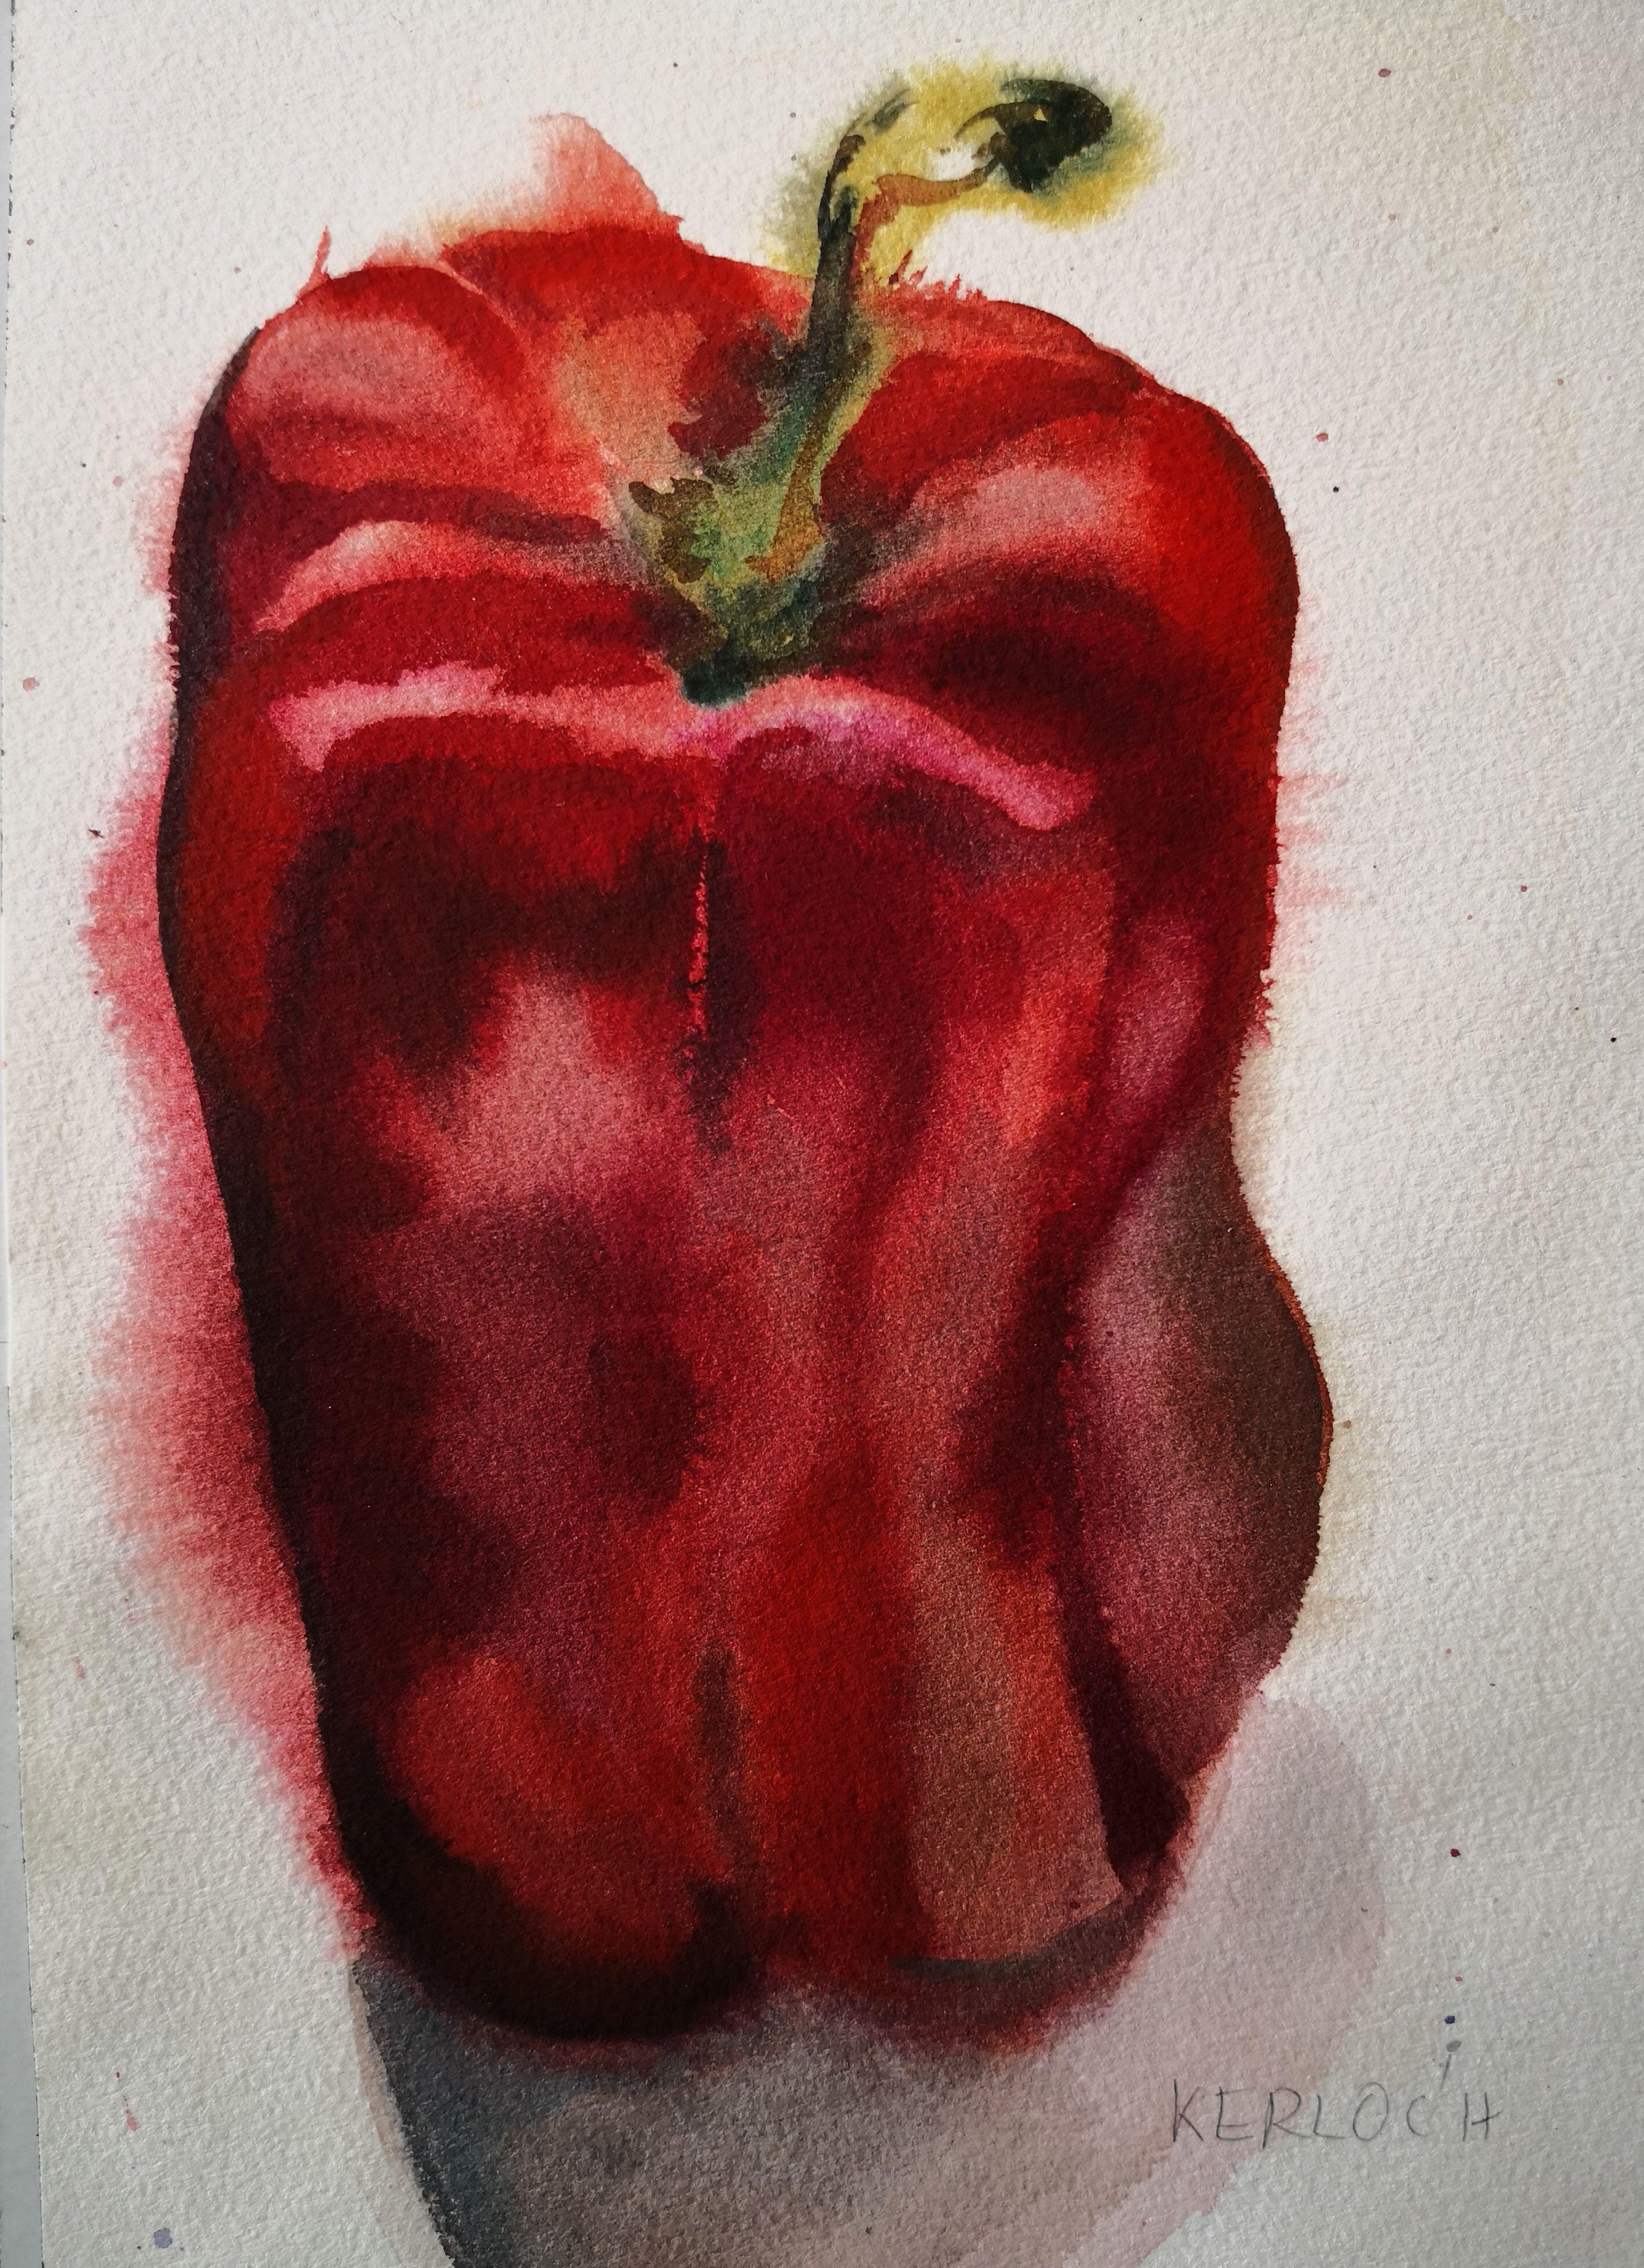 Red Pepper #2, Painting, Watercolor on Paper - Art by Anyck Alvarez Kerloch